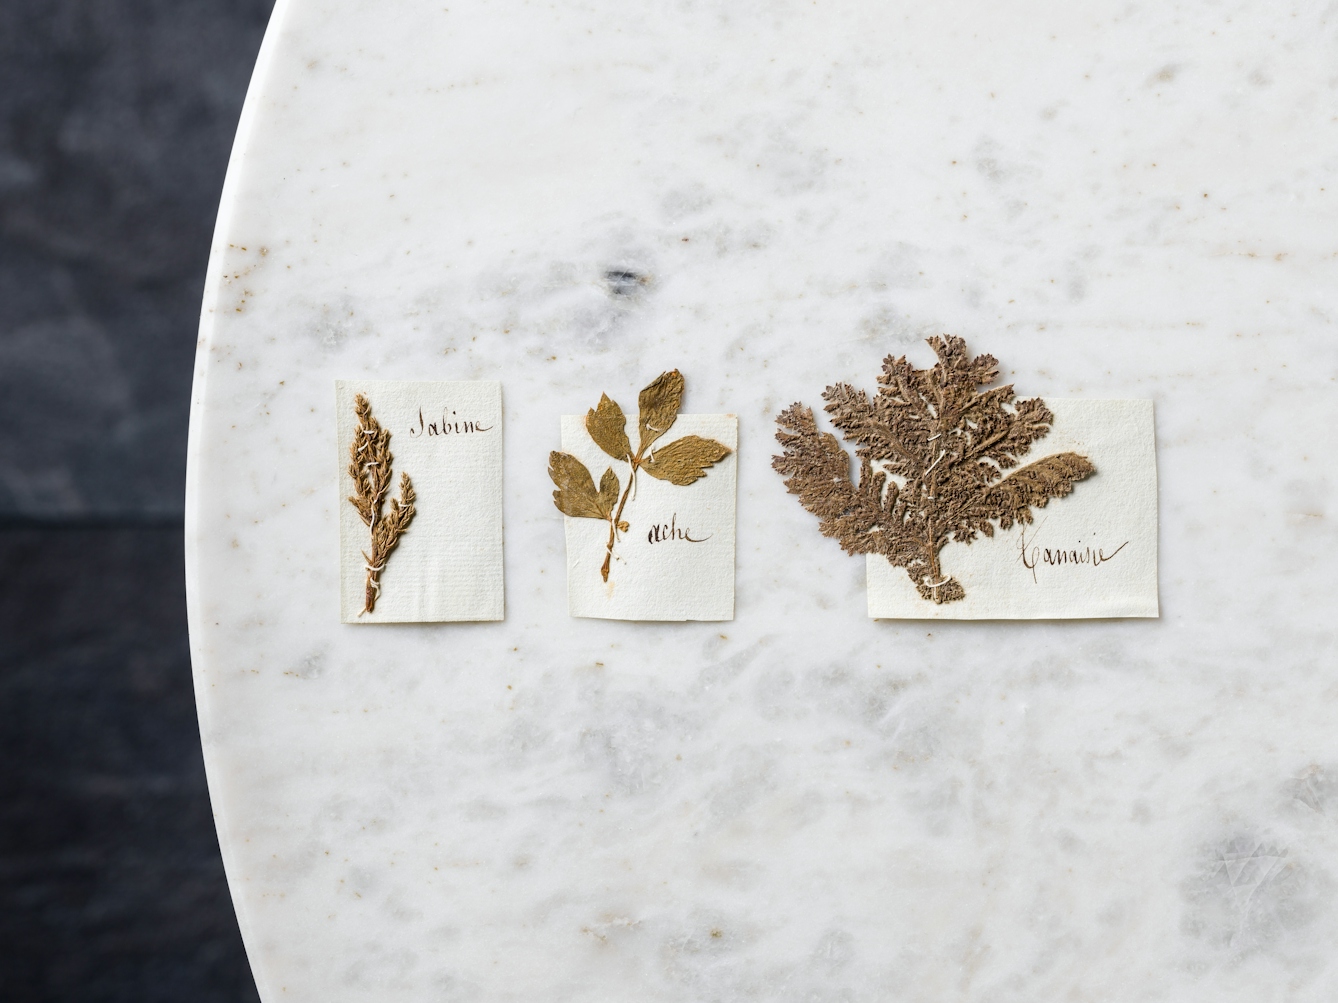 Pressed cuttings of the plants ache (smallage), sabine (savin), and tanaisie (tansy), stitched onto paper with name labels in French.